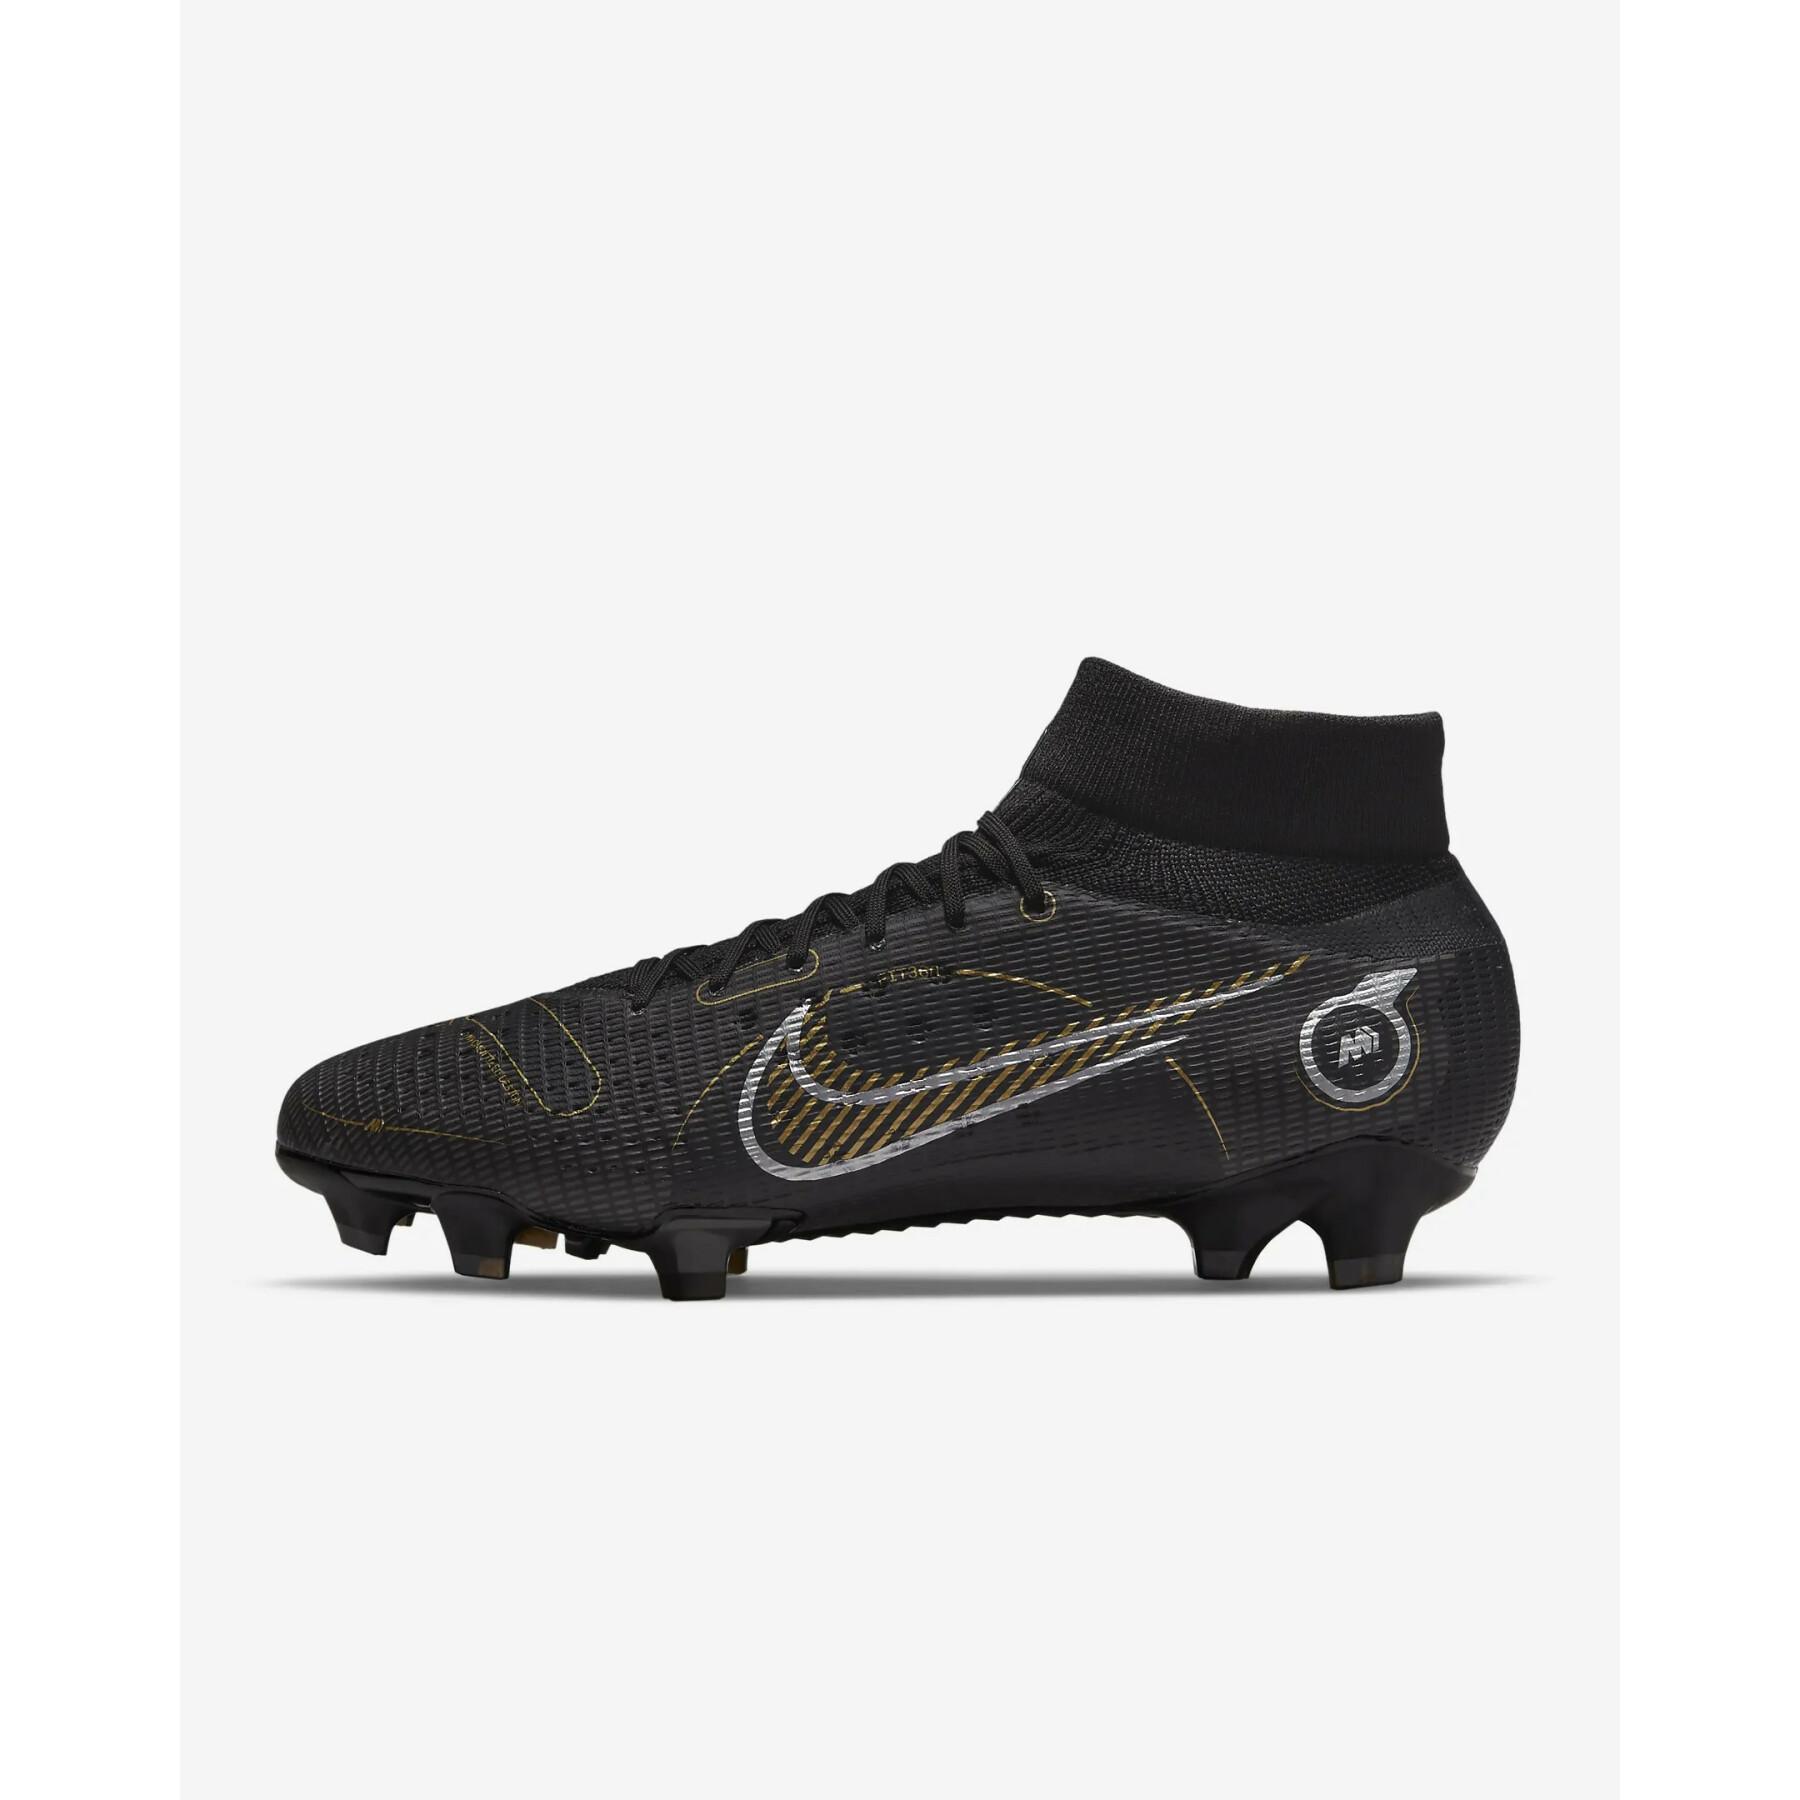 Chaussures de football Nike Superfly 8 pro FG